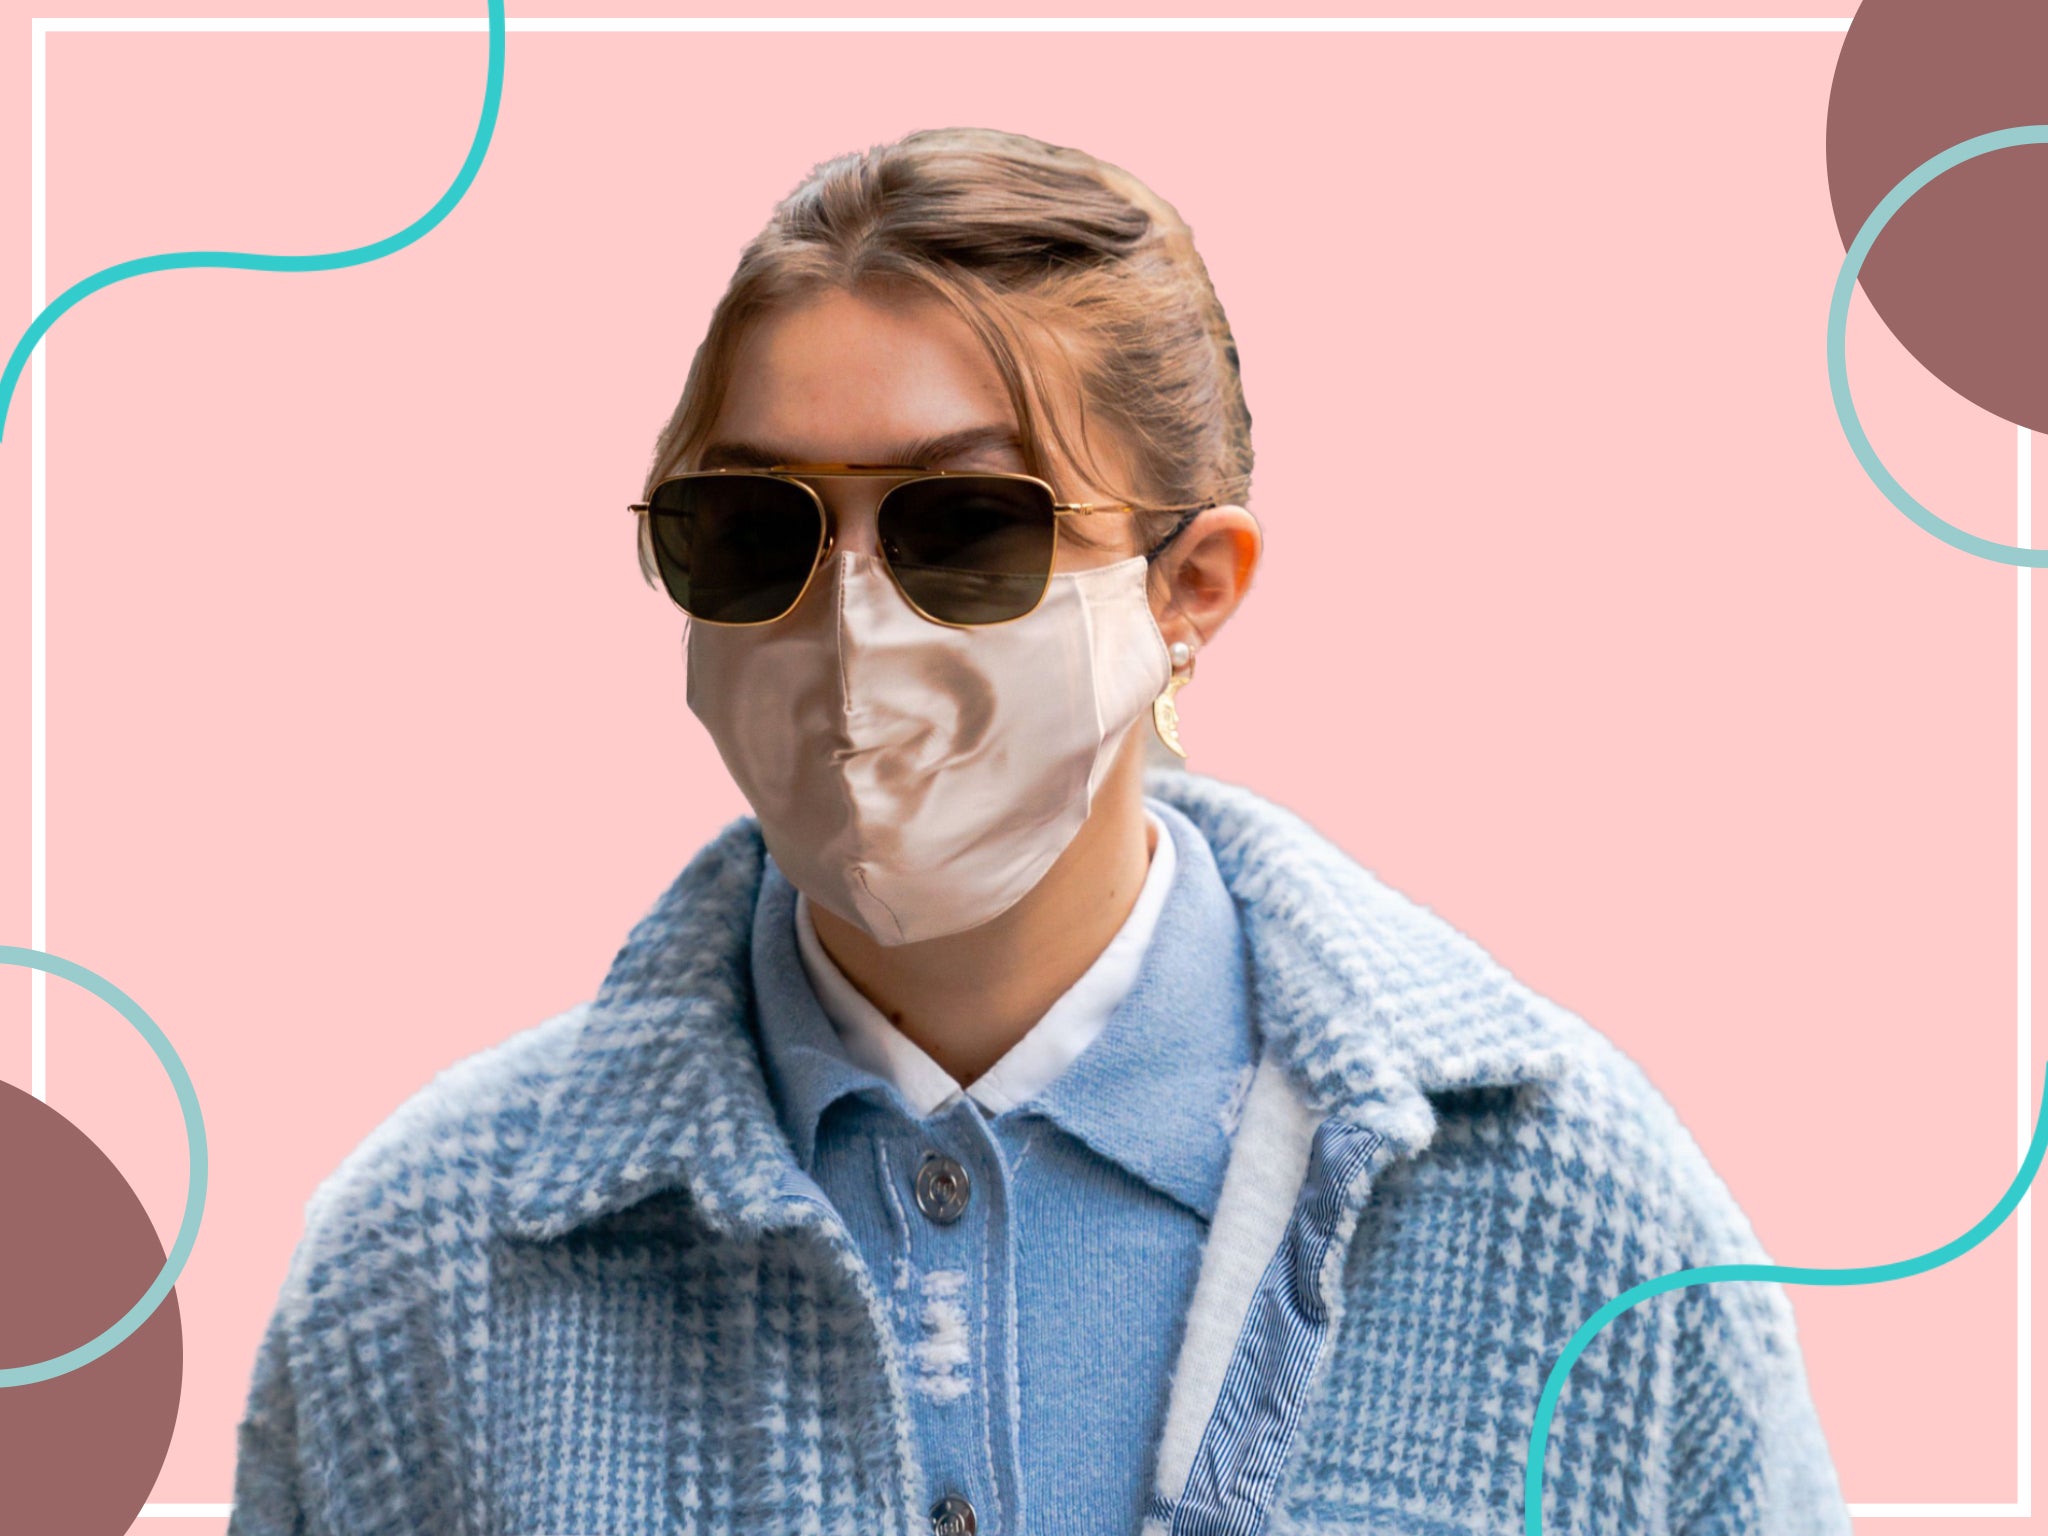 These celeb faves can help reduce 'maskne' – breakouts caused by wearing face coverings